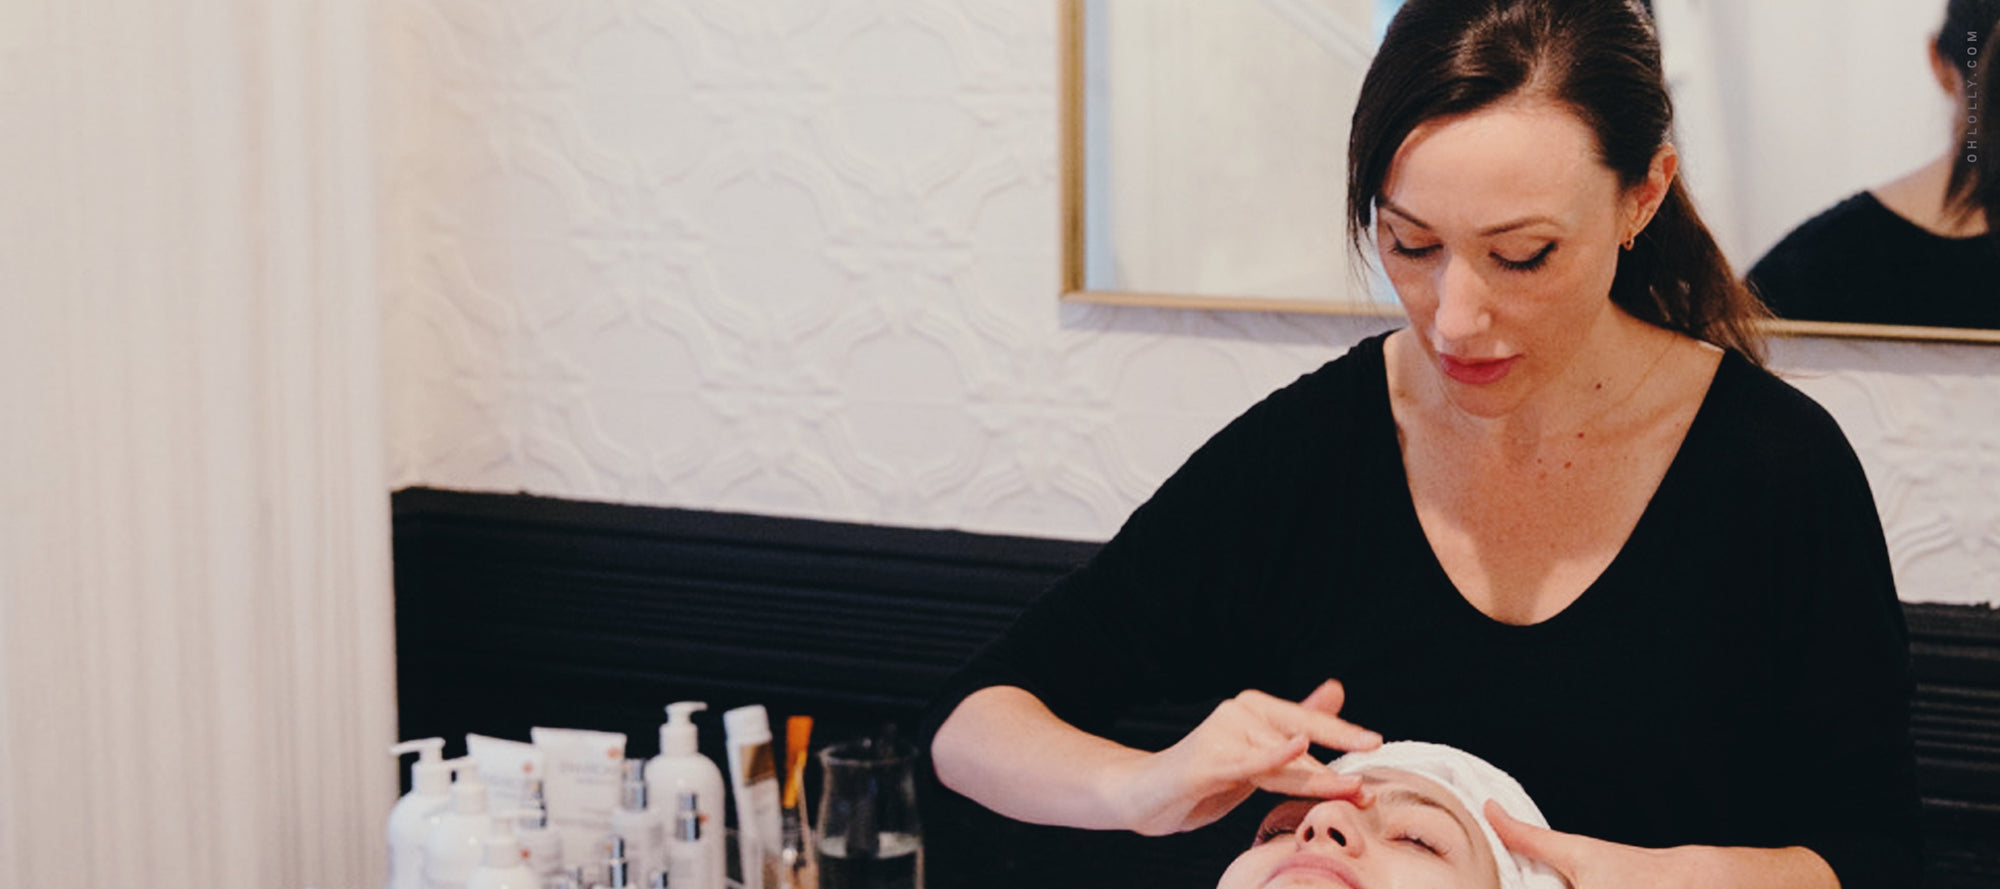 Getting Pro Skin: An Interview with Celebrity Facialist Kristyn Smith